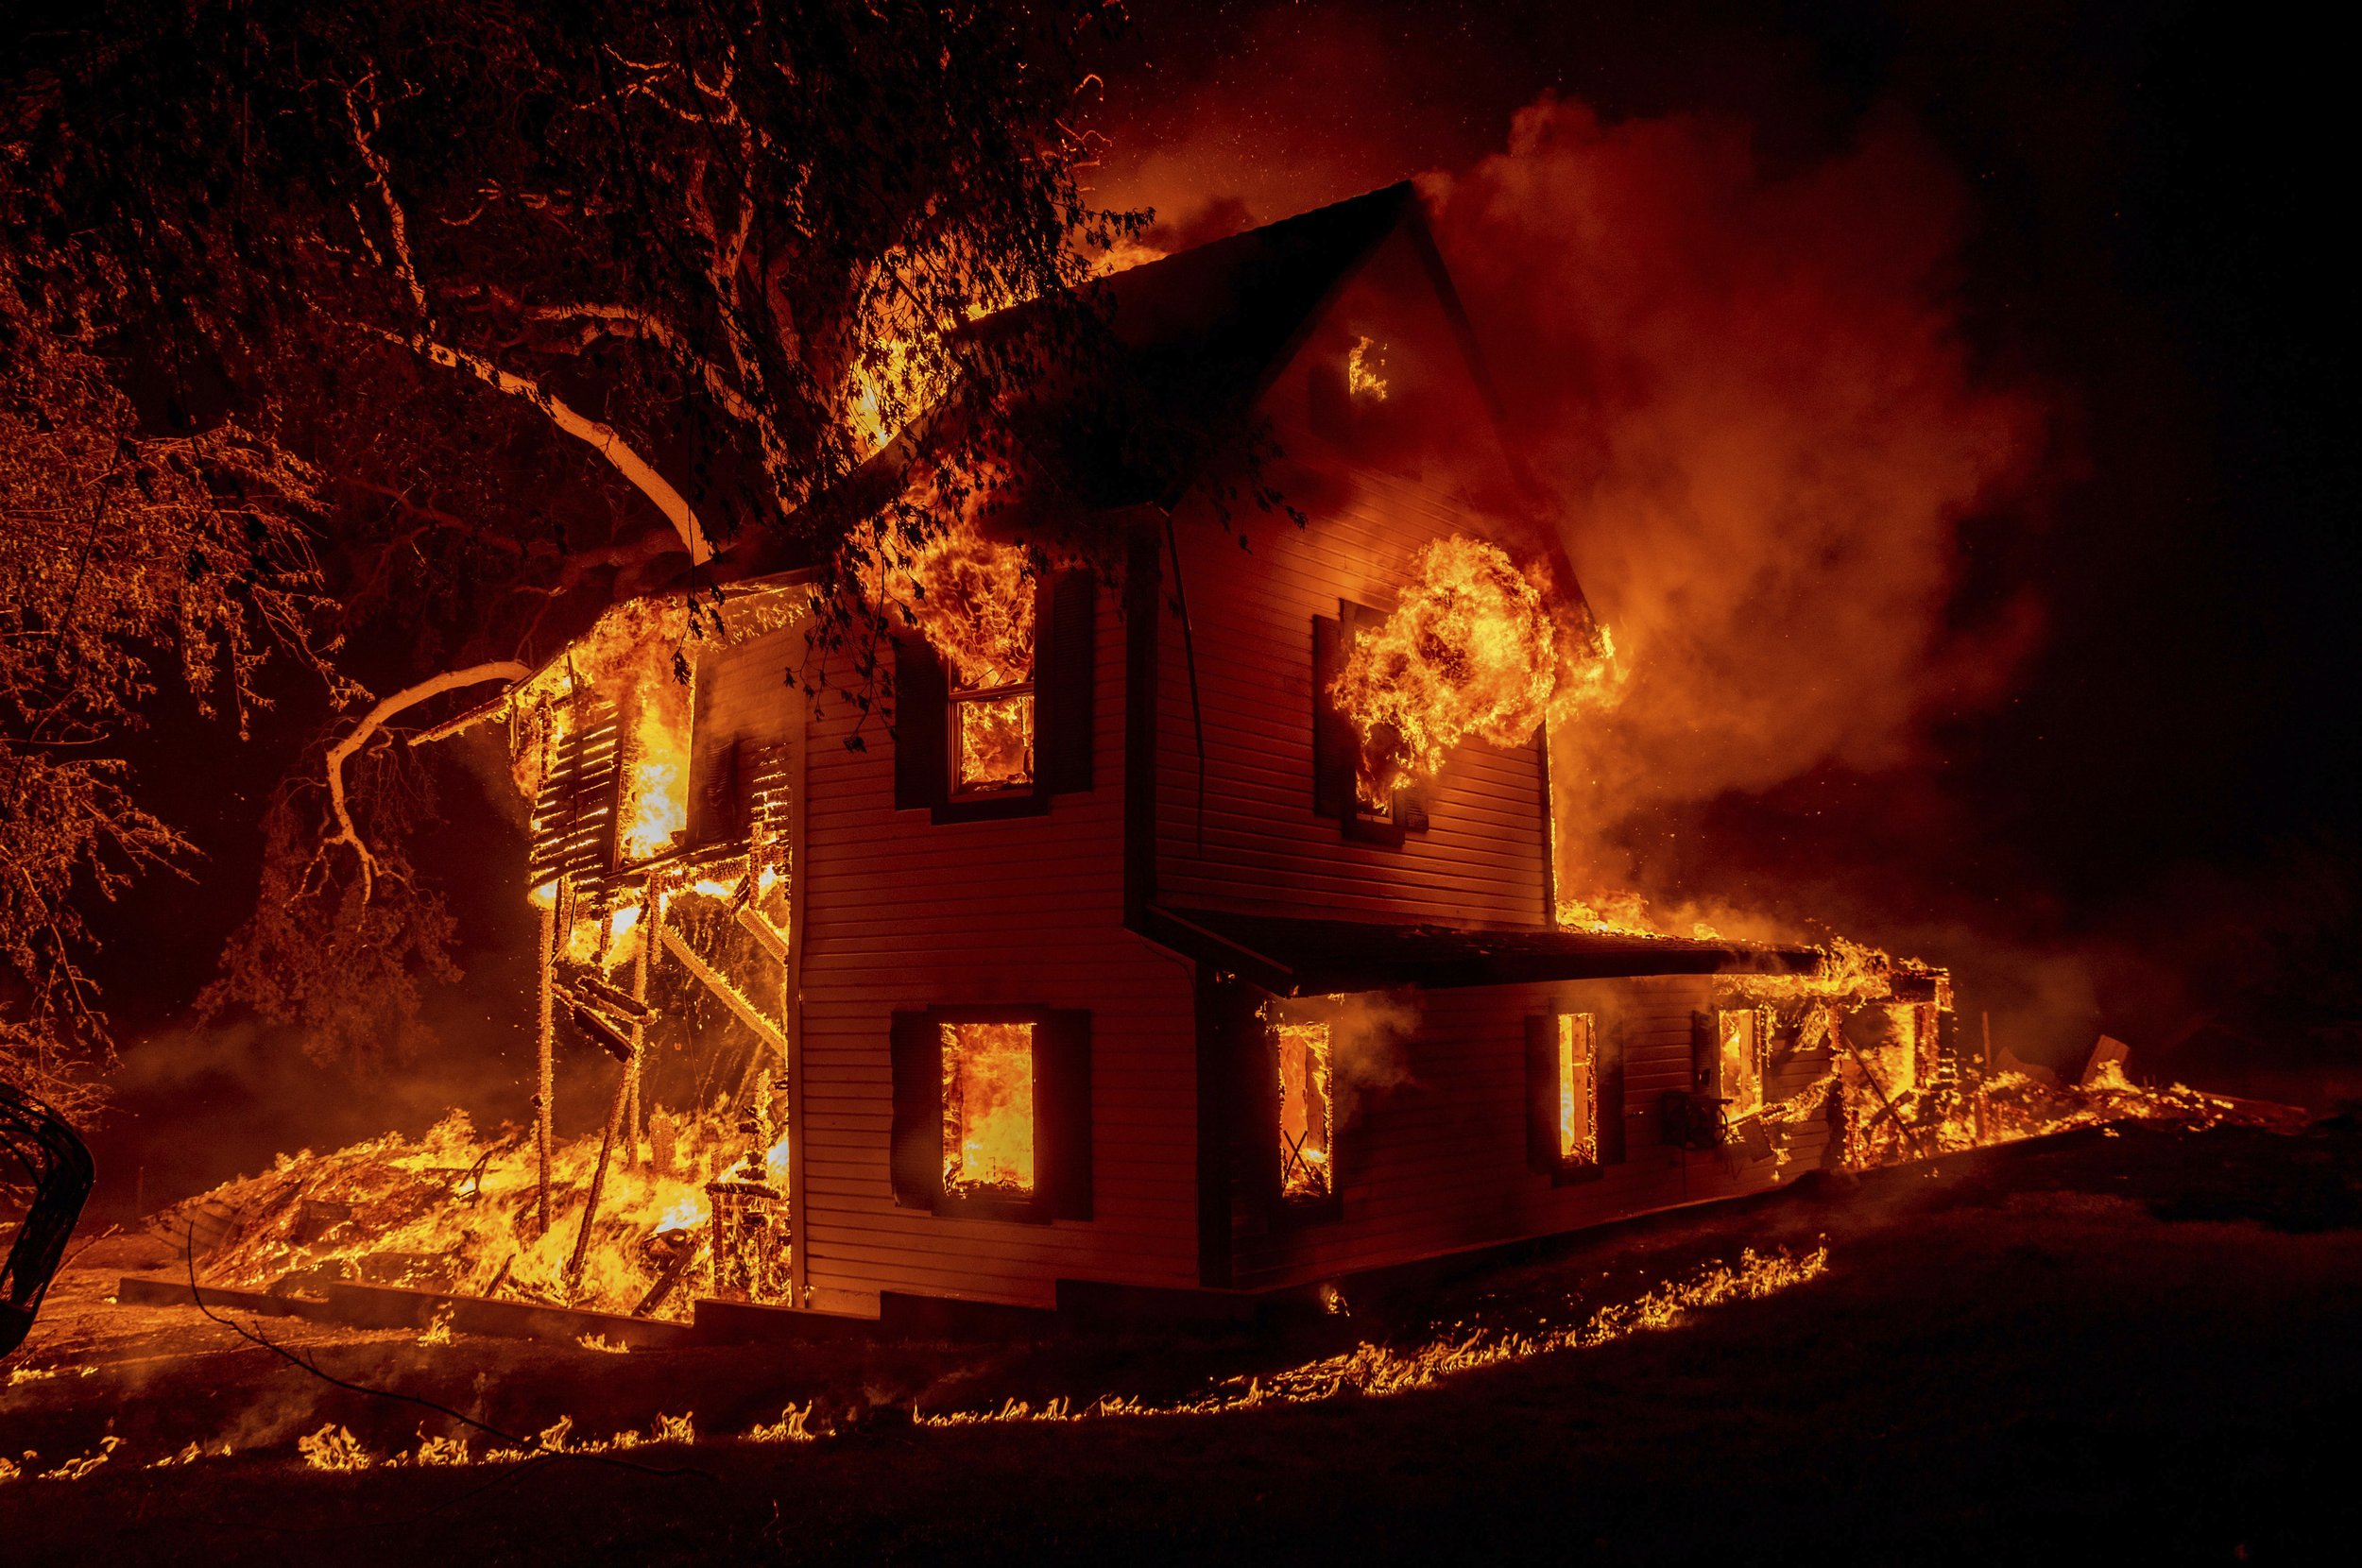  A home is engulfed in flames as the Dixie fire rages south of Janesville in Northern California, on Aug. 16, 2021. (AP Photo/Ethan Swope) 